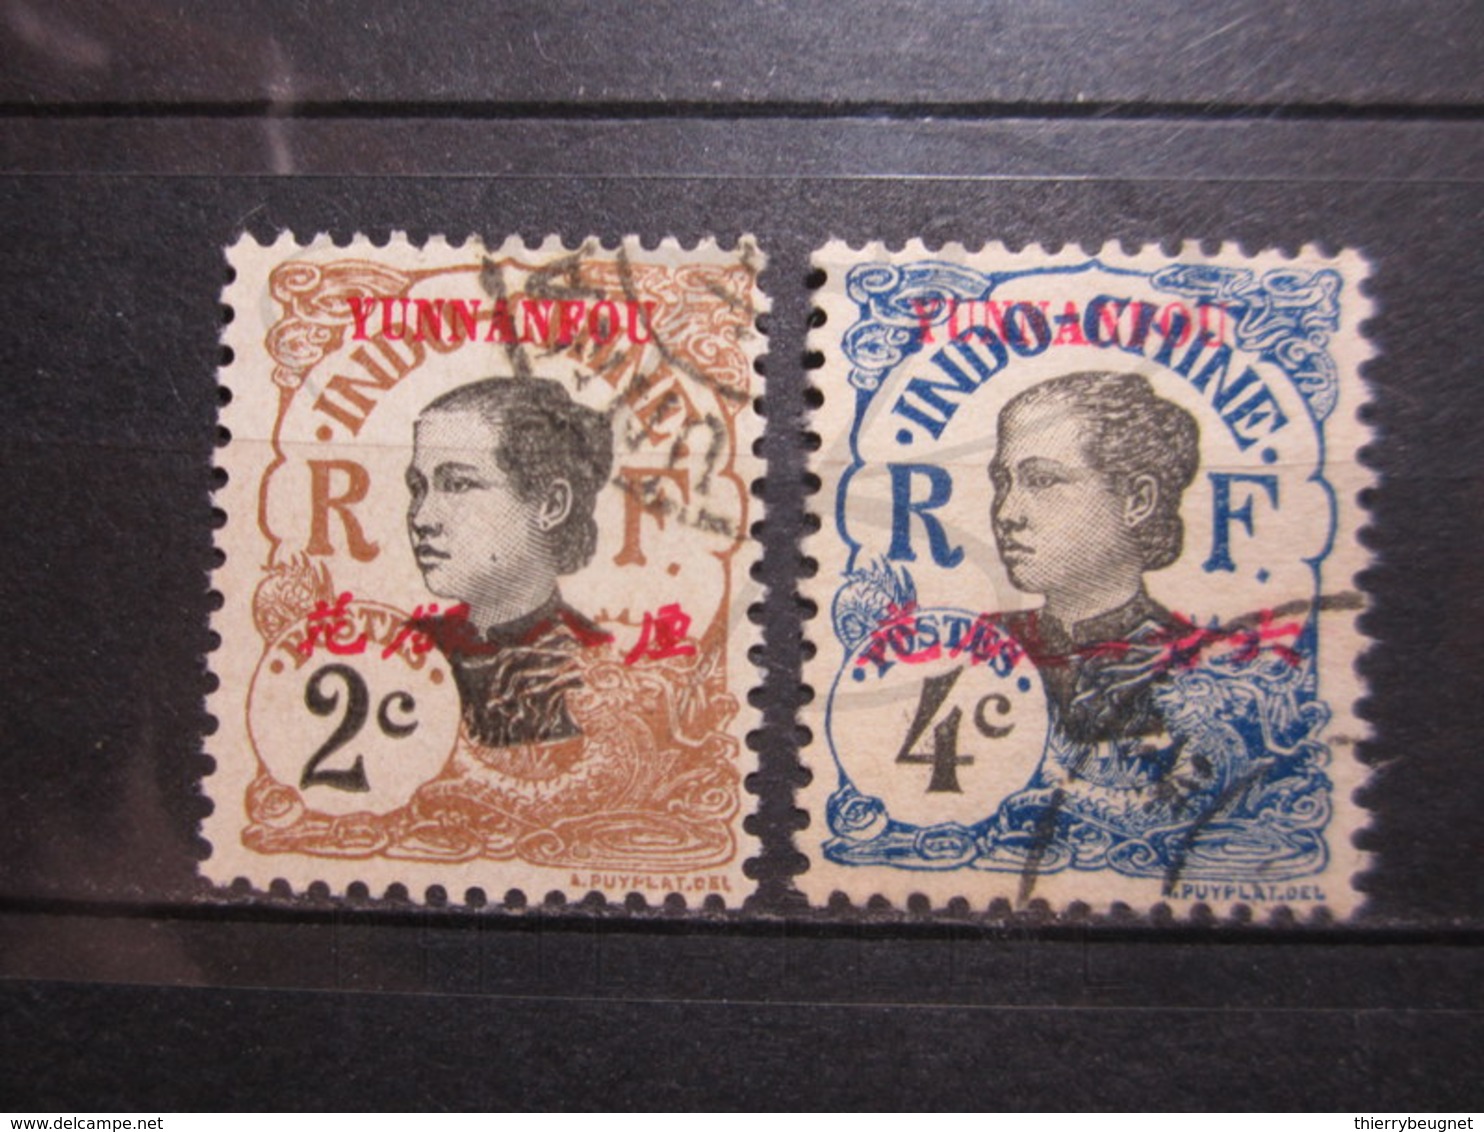 VEND BEAUX TIMBRES DE YUNNANFOU N° 34 + 35 !!! - Used Stamps